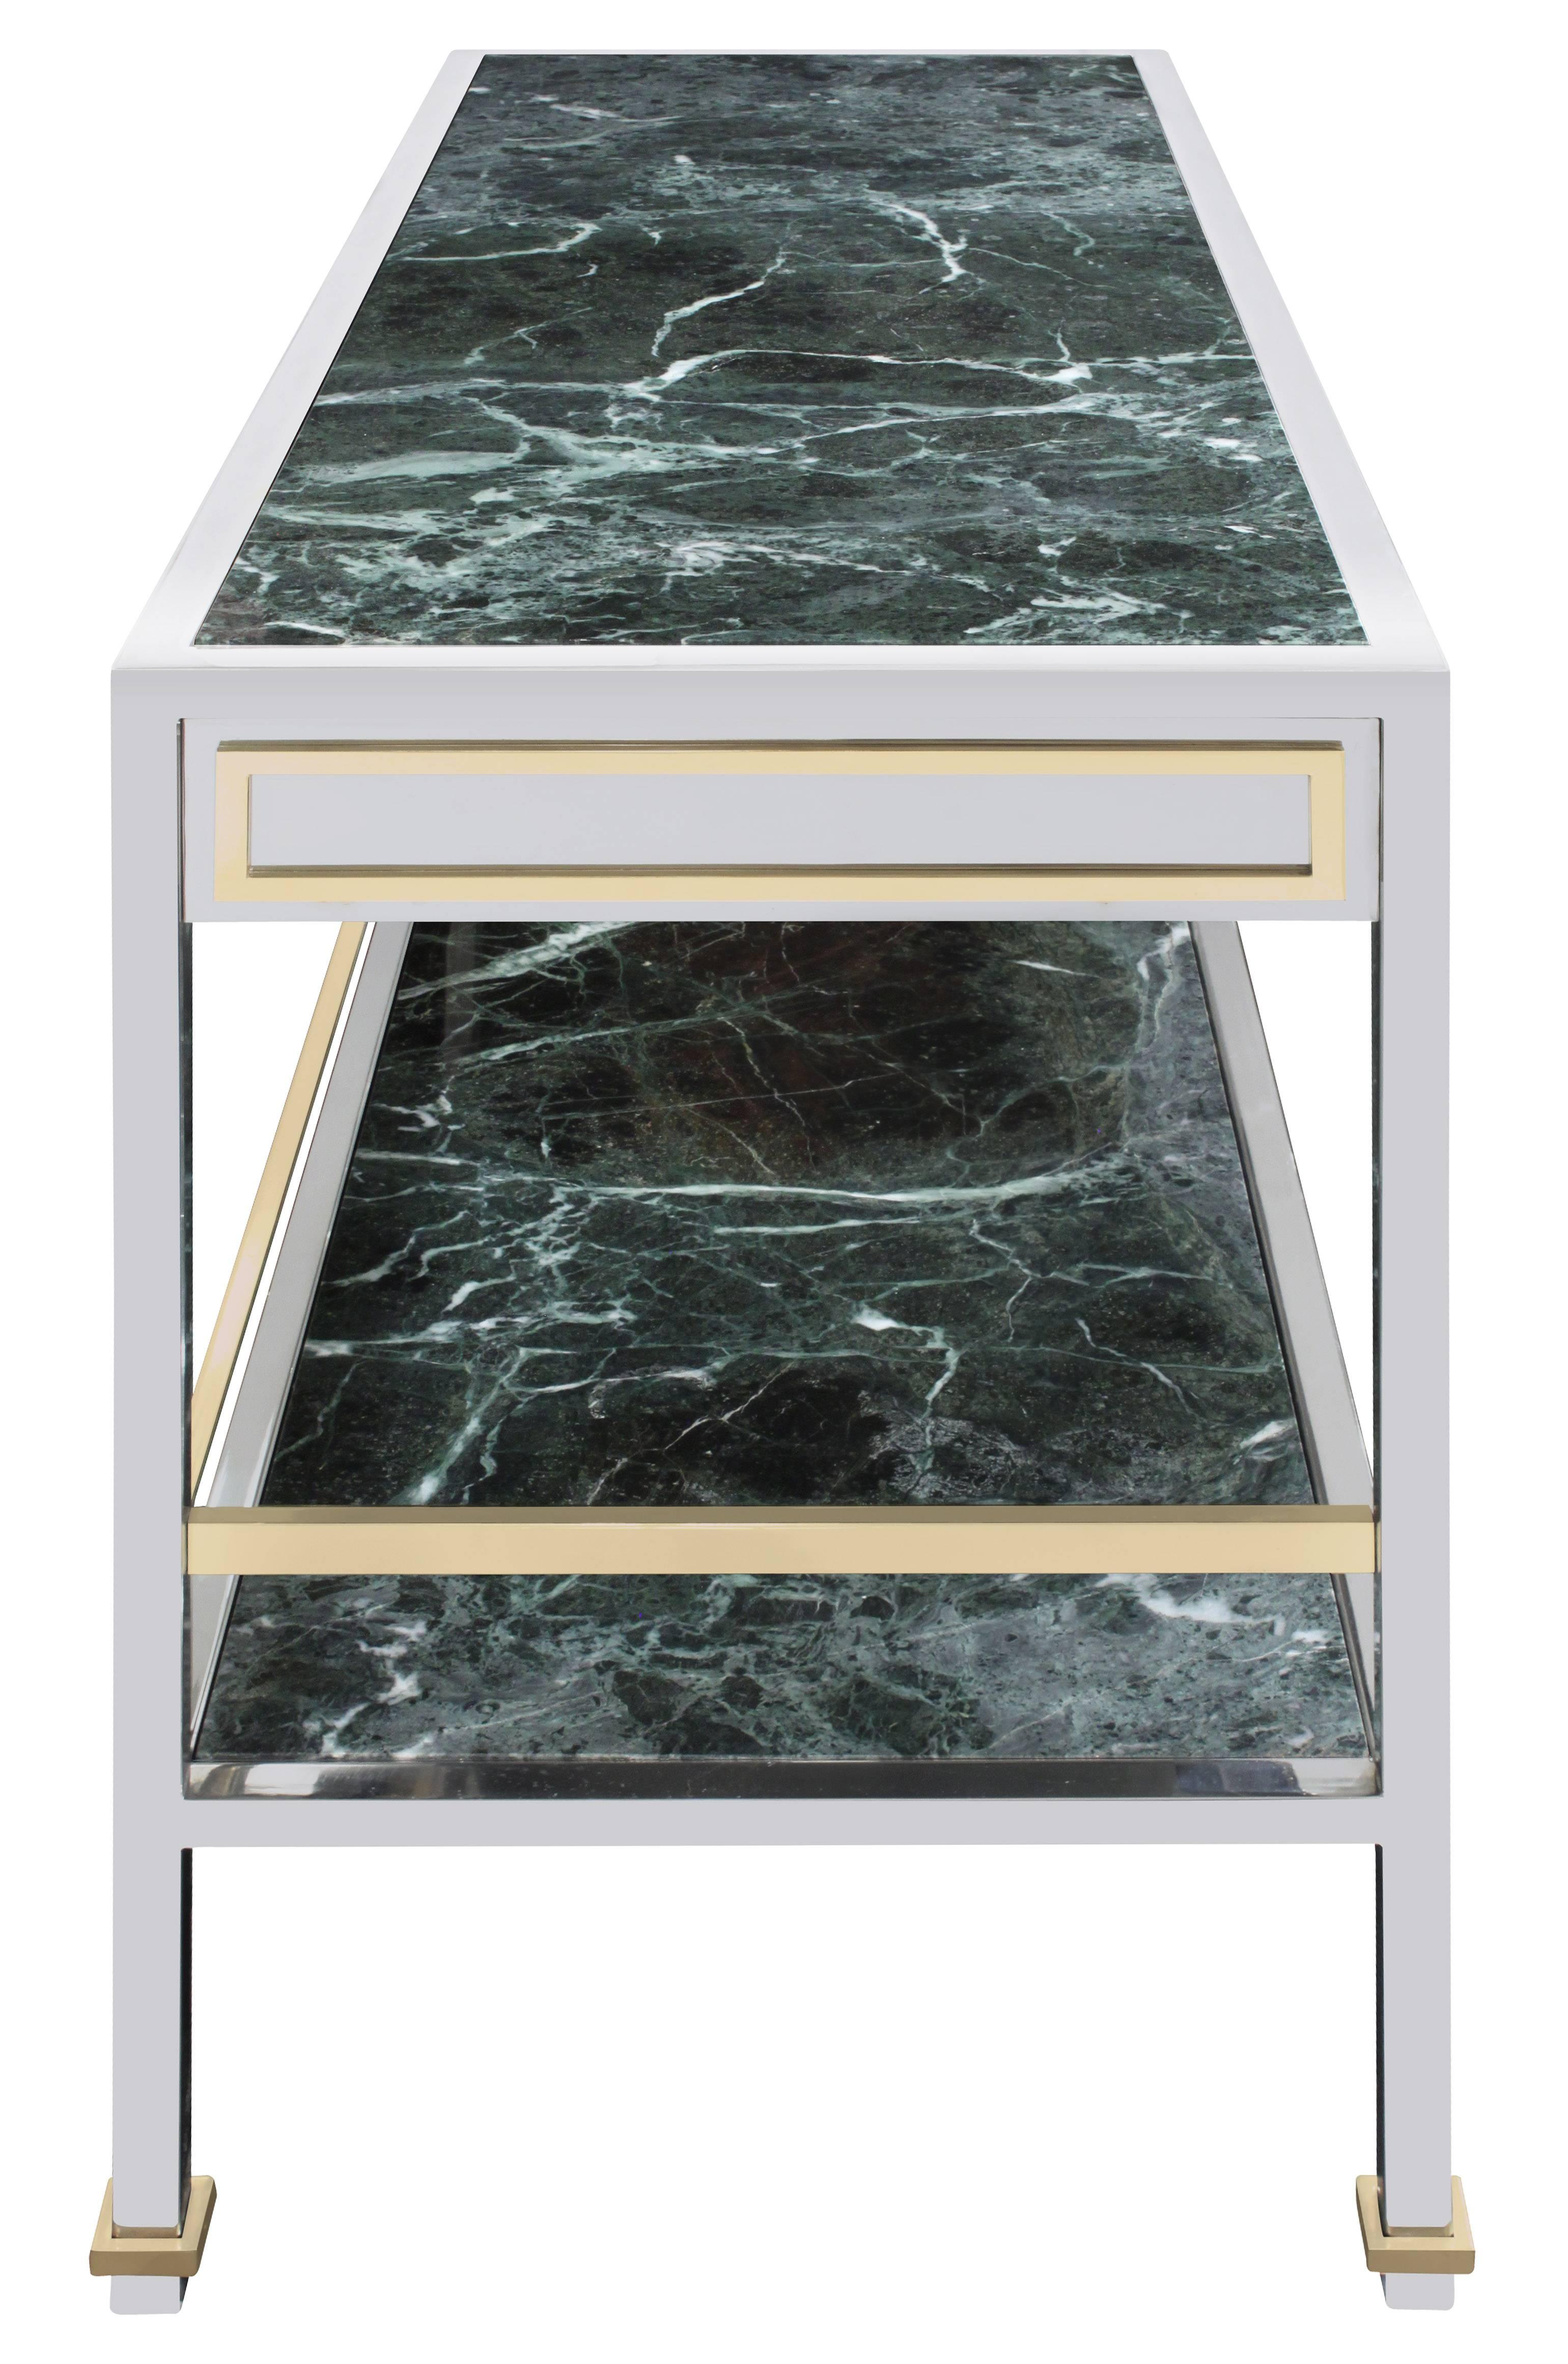 American Console Table/Dry Bar in Polished Steel with Inset Marble by Paul M. Jones